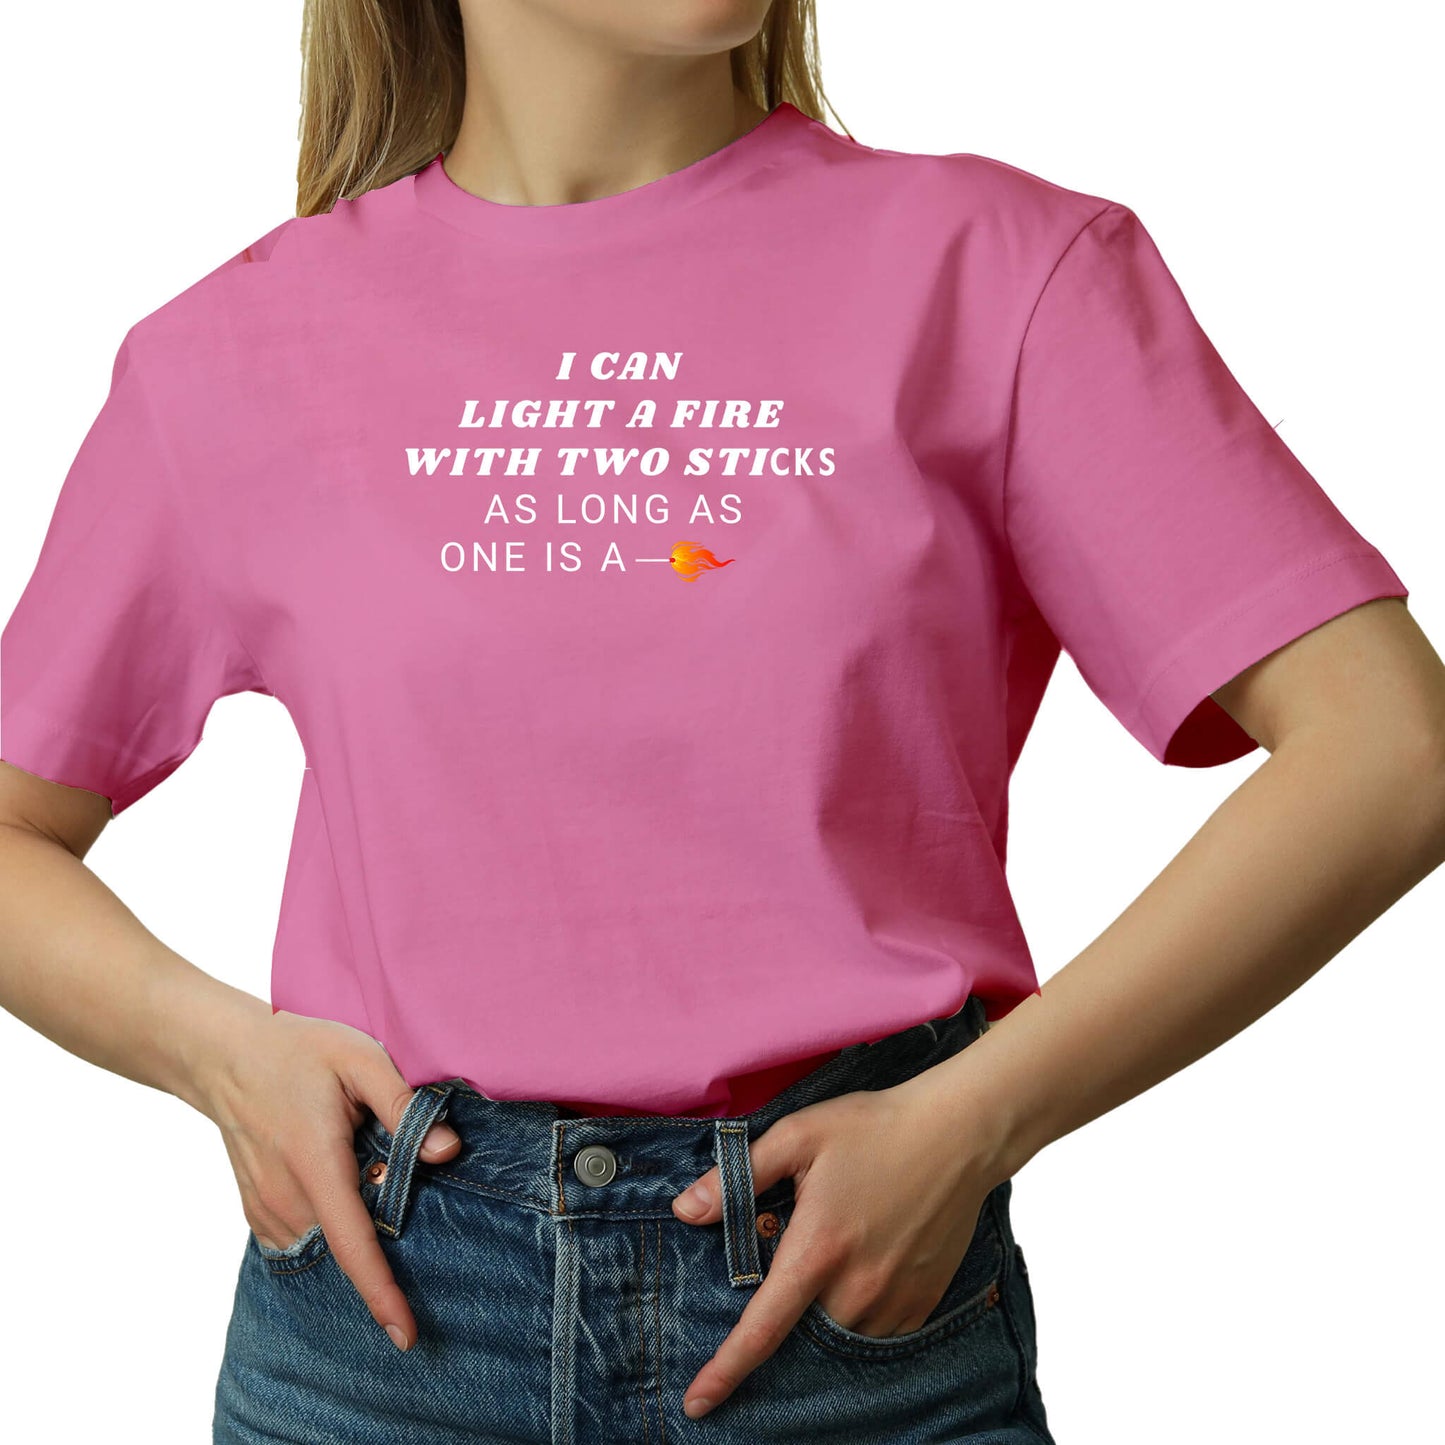 I can light a fire with two sticks t-shirt pink female